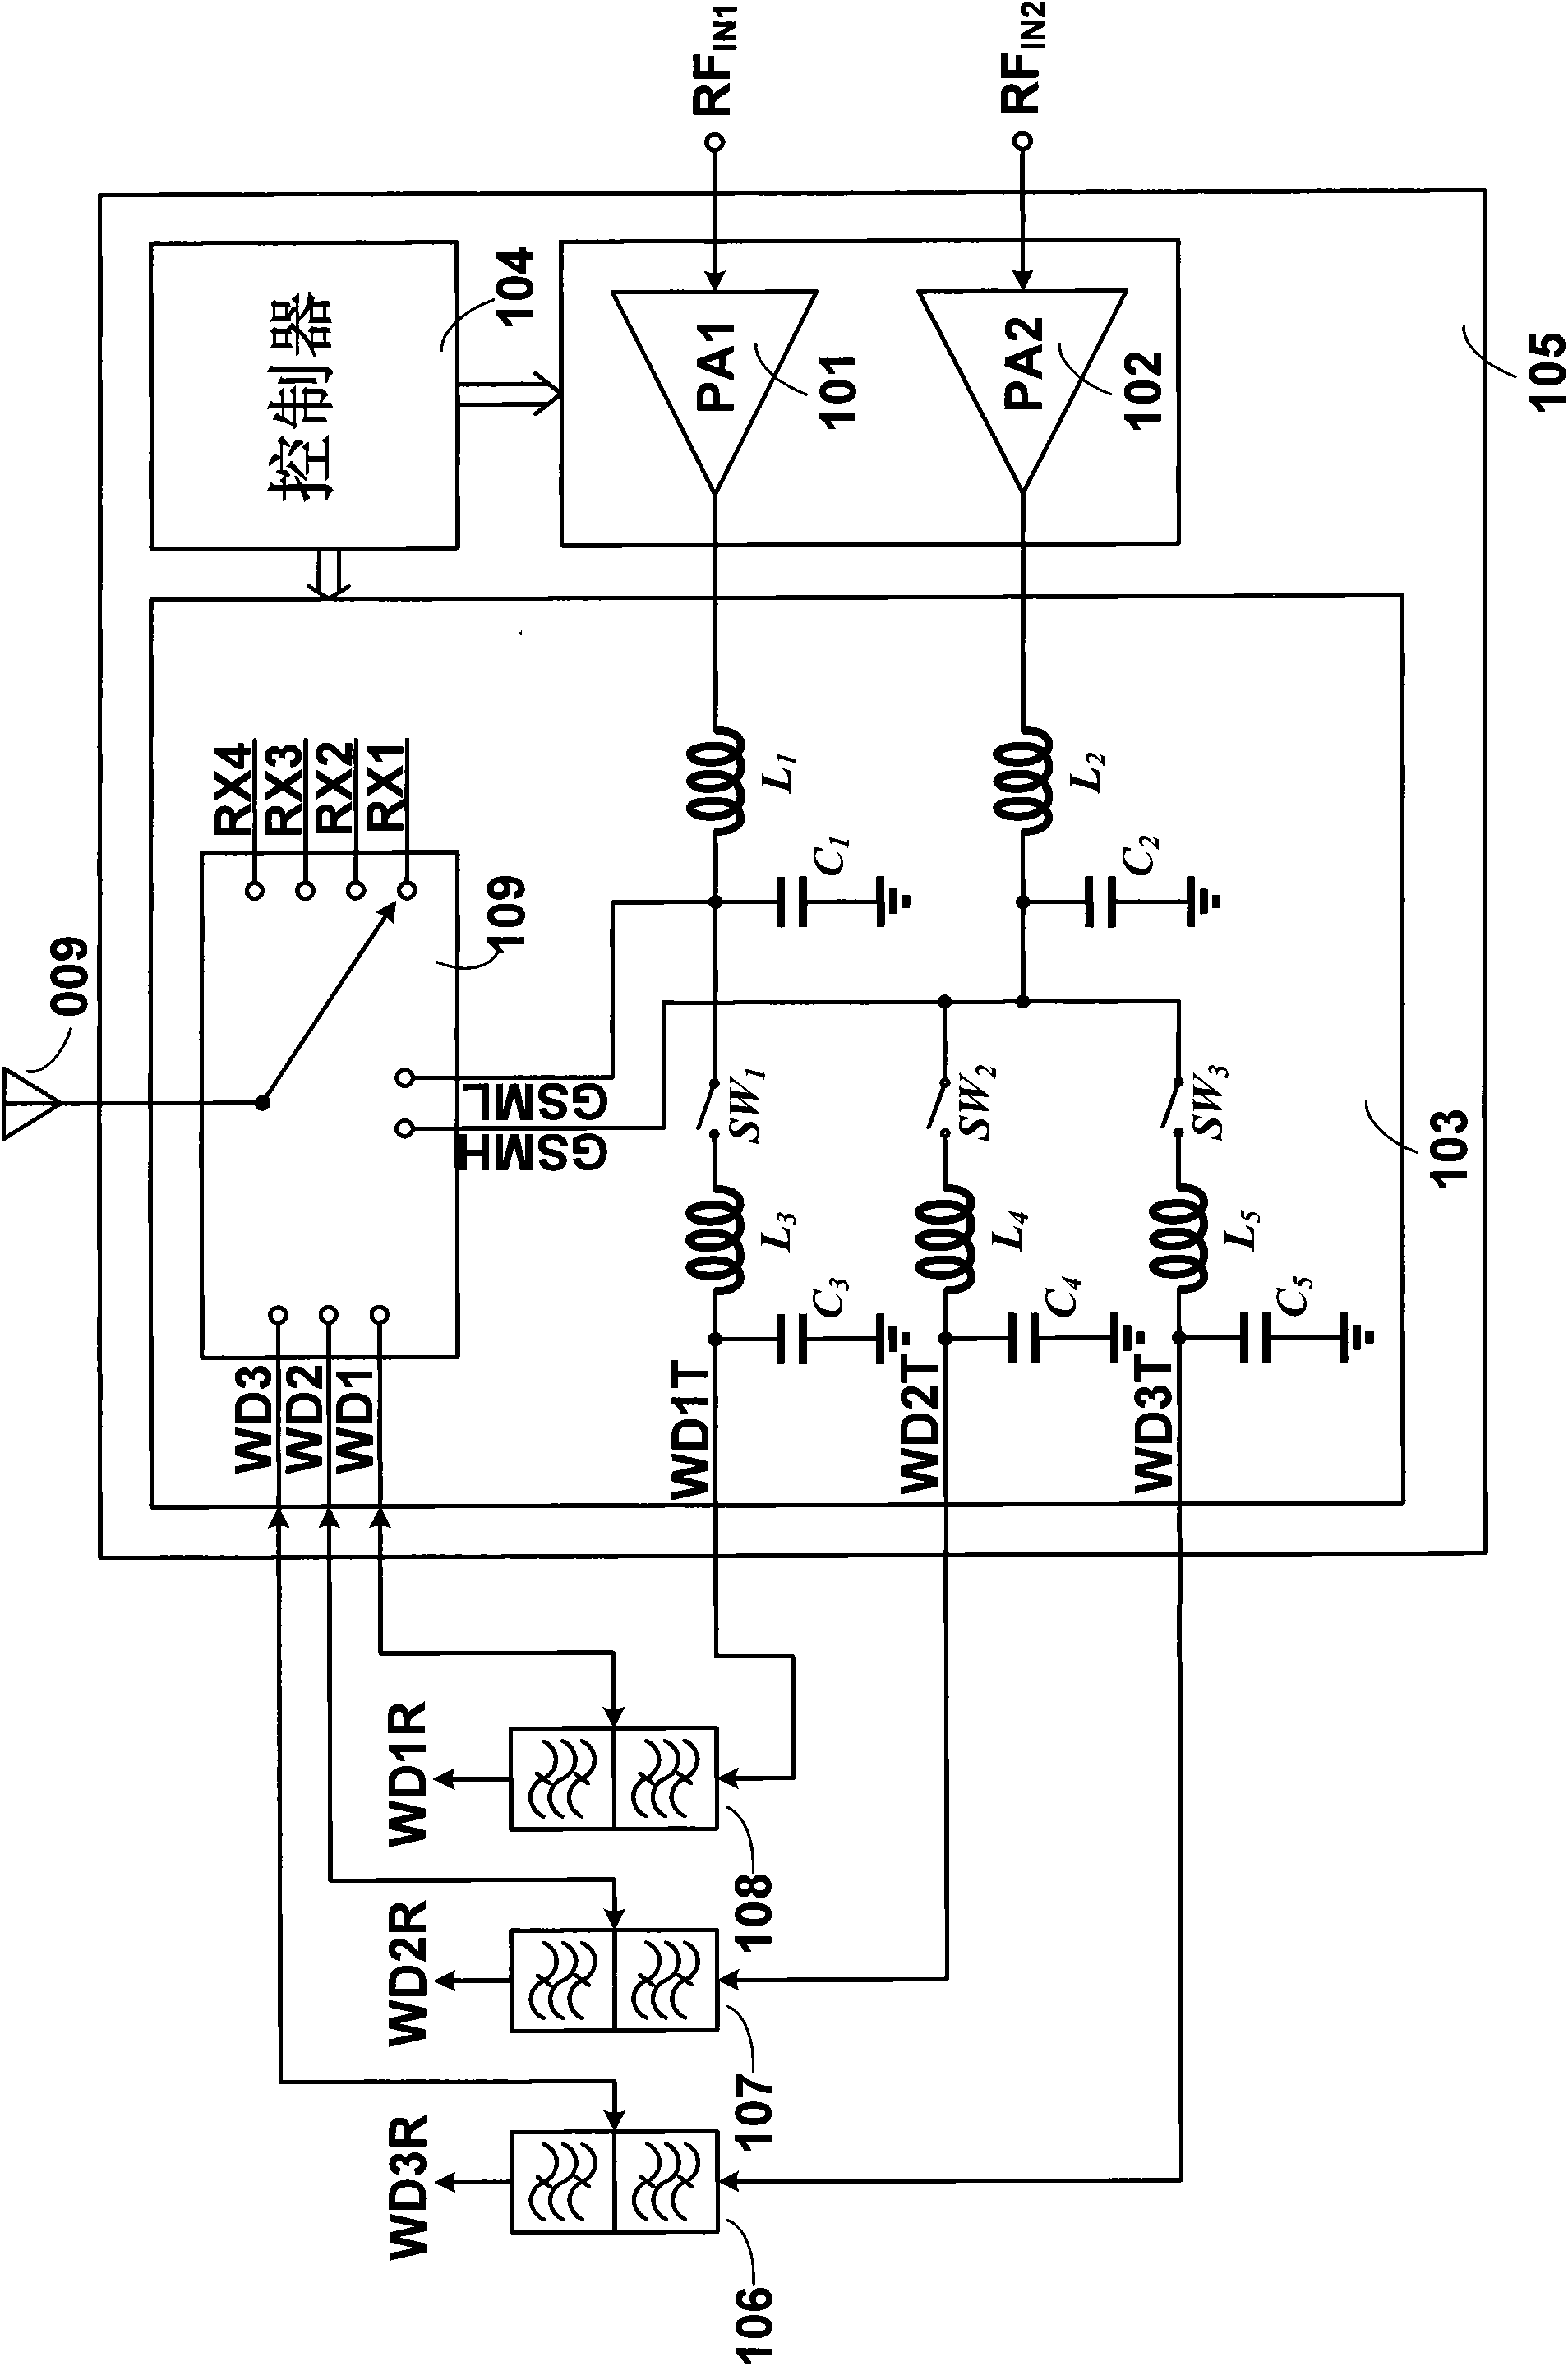 Configurable multimode radio-frequency front end module and mobile terminal having same